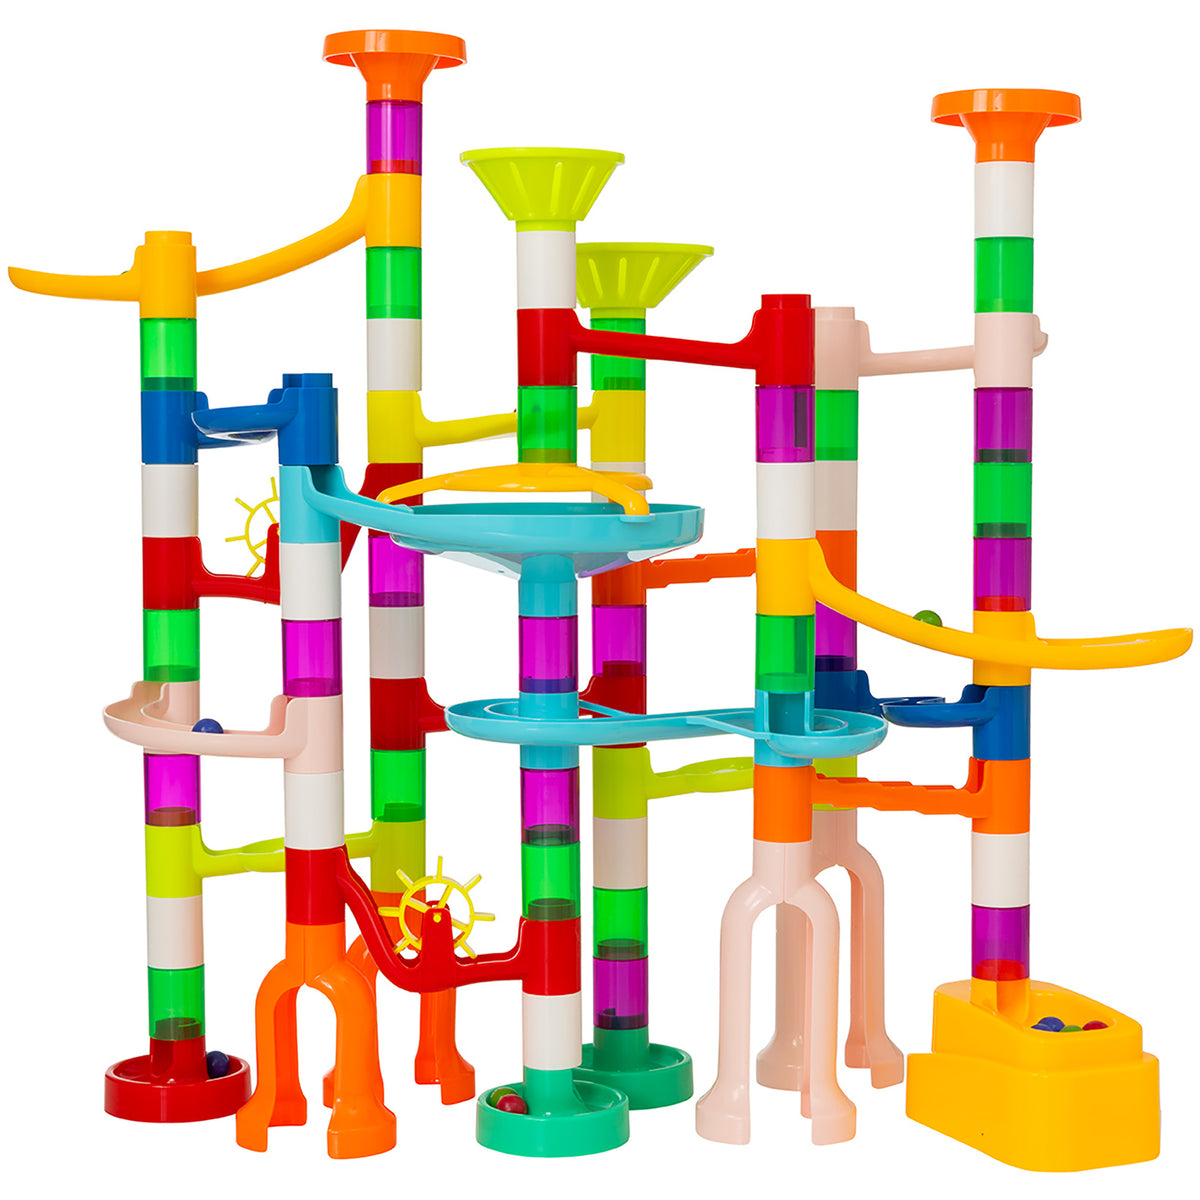 image of 100+ piece Marble Run from HTI